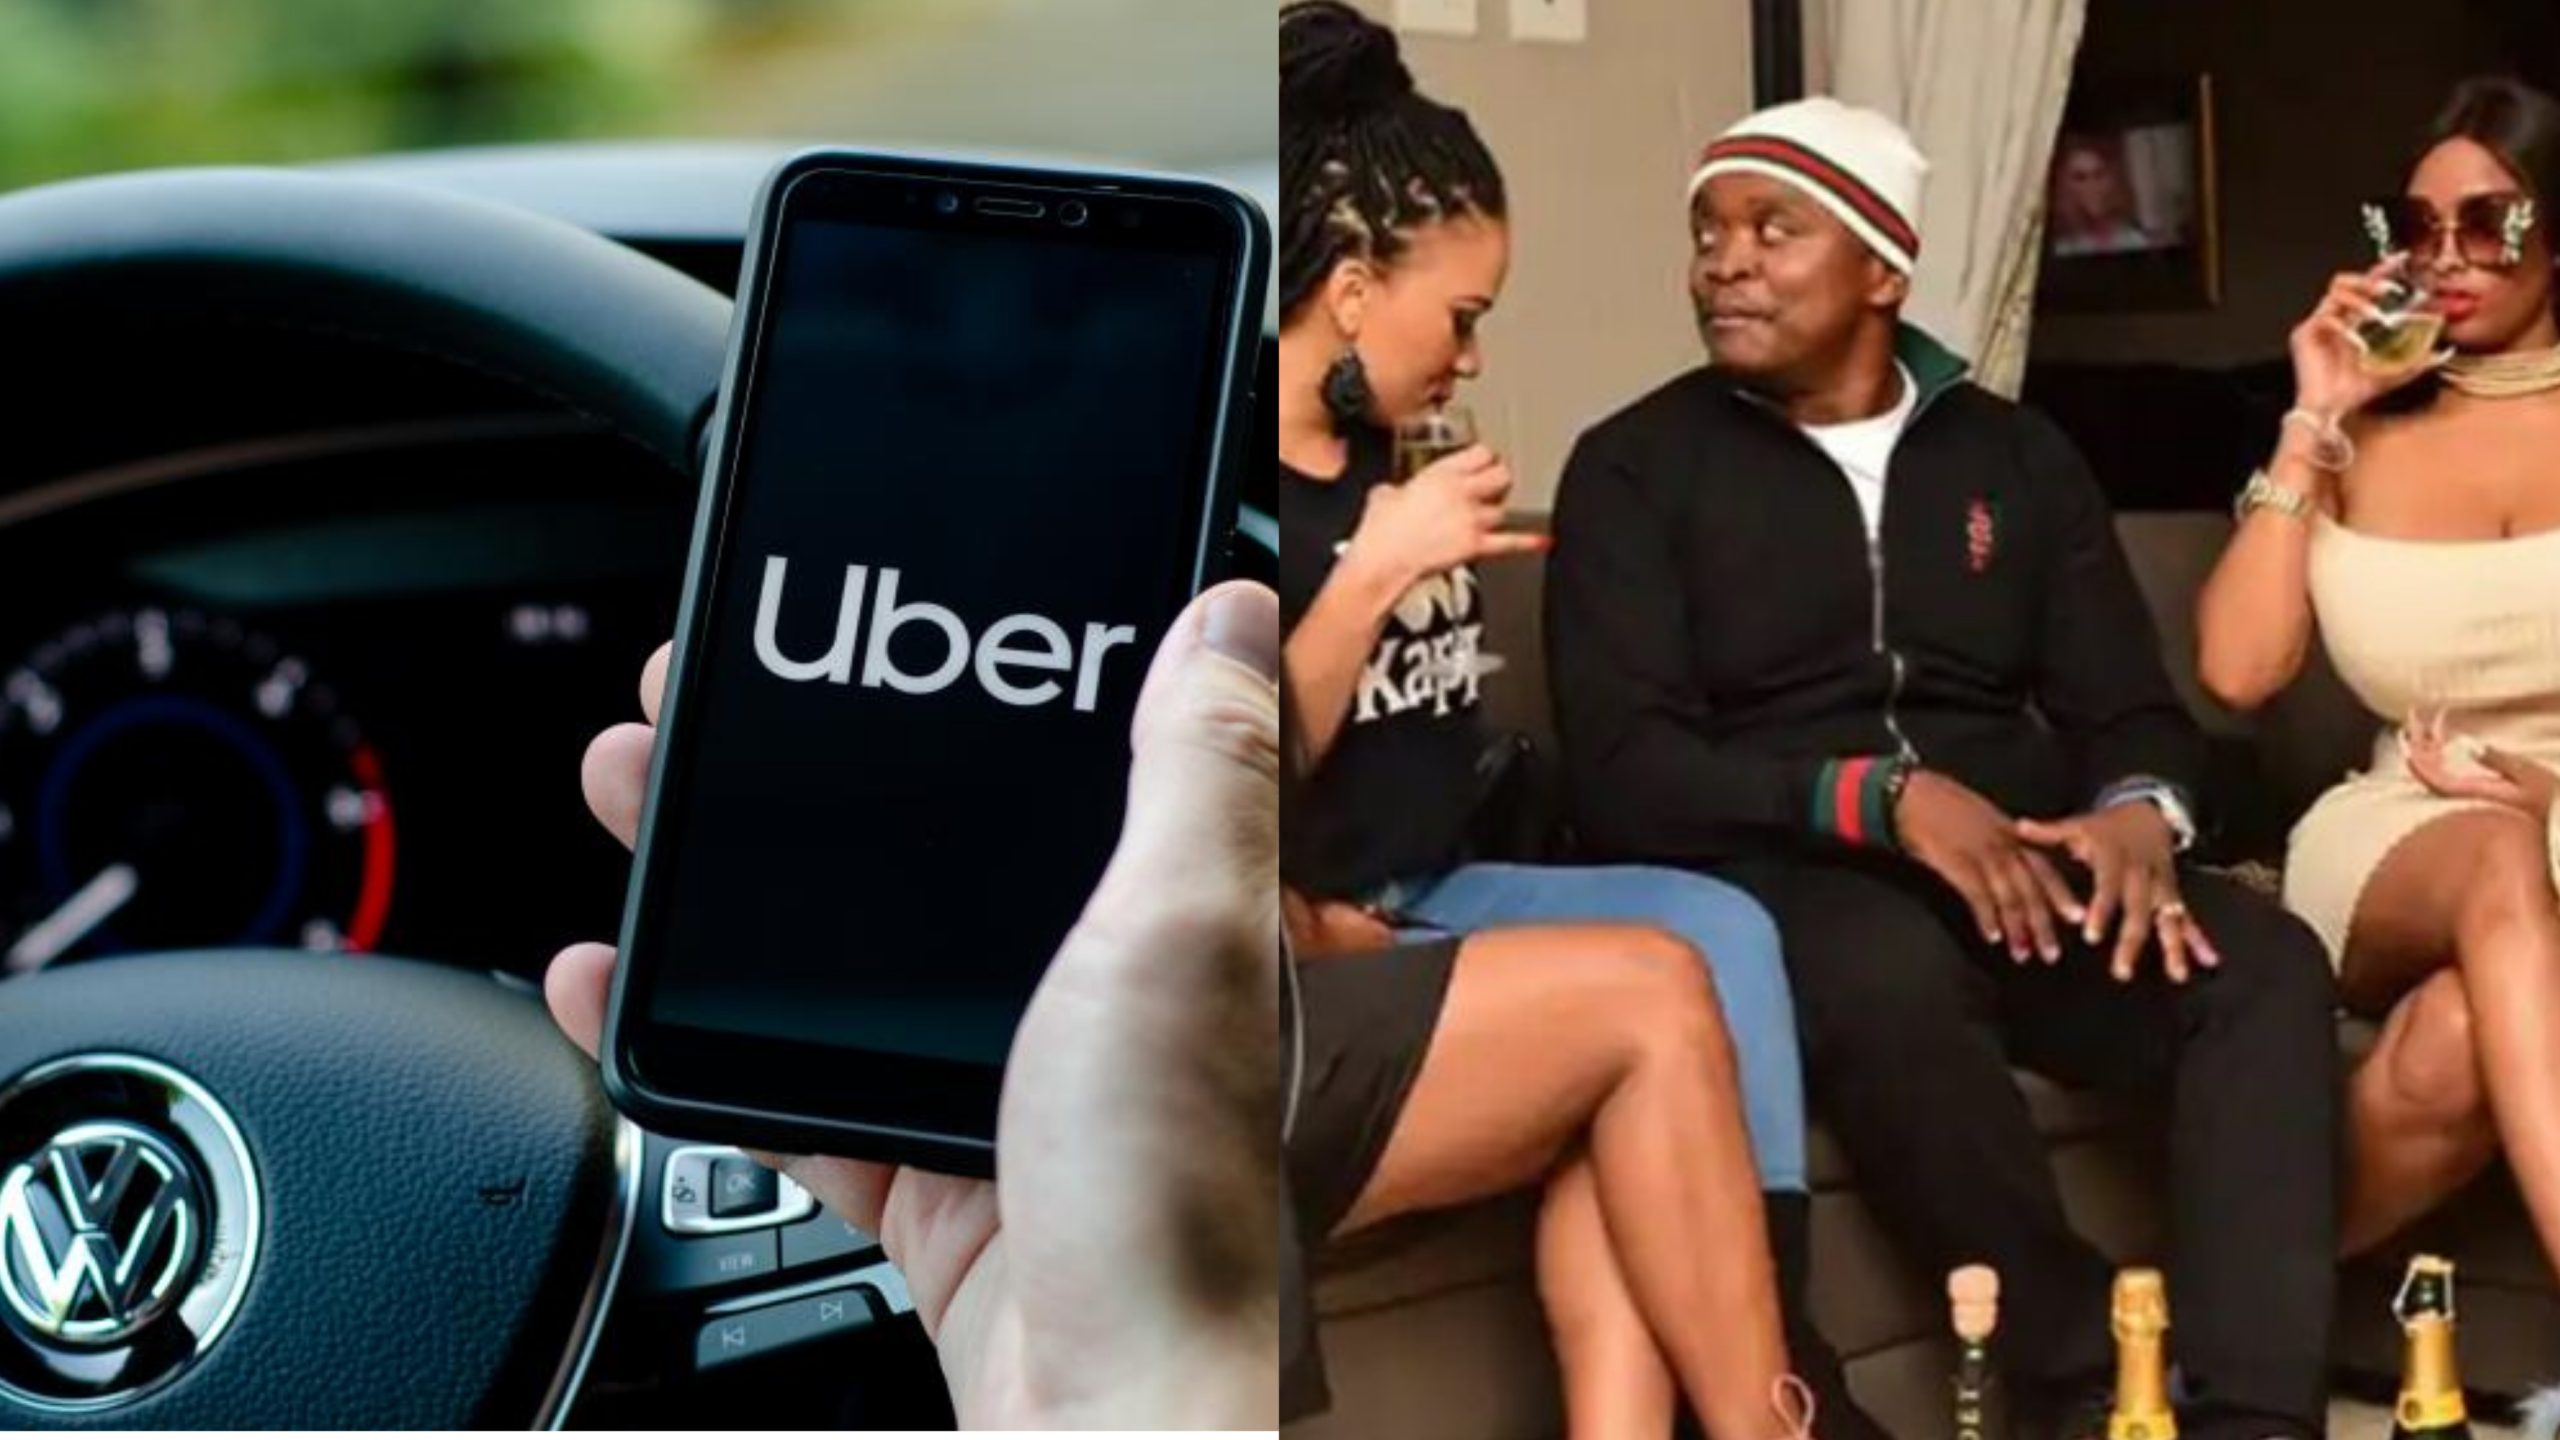 “How the mighty have fallen” – Mixed reactions as Instagram big boy turns Uber driver